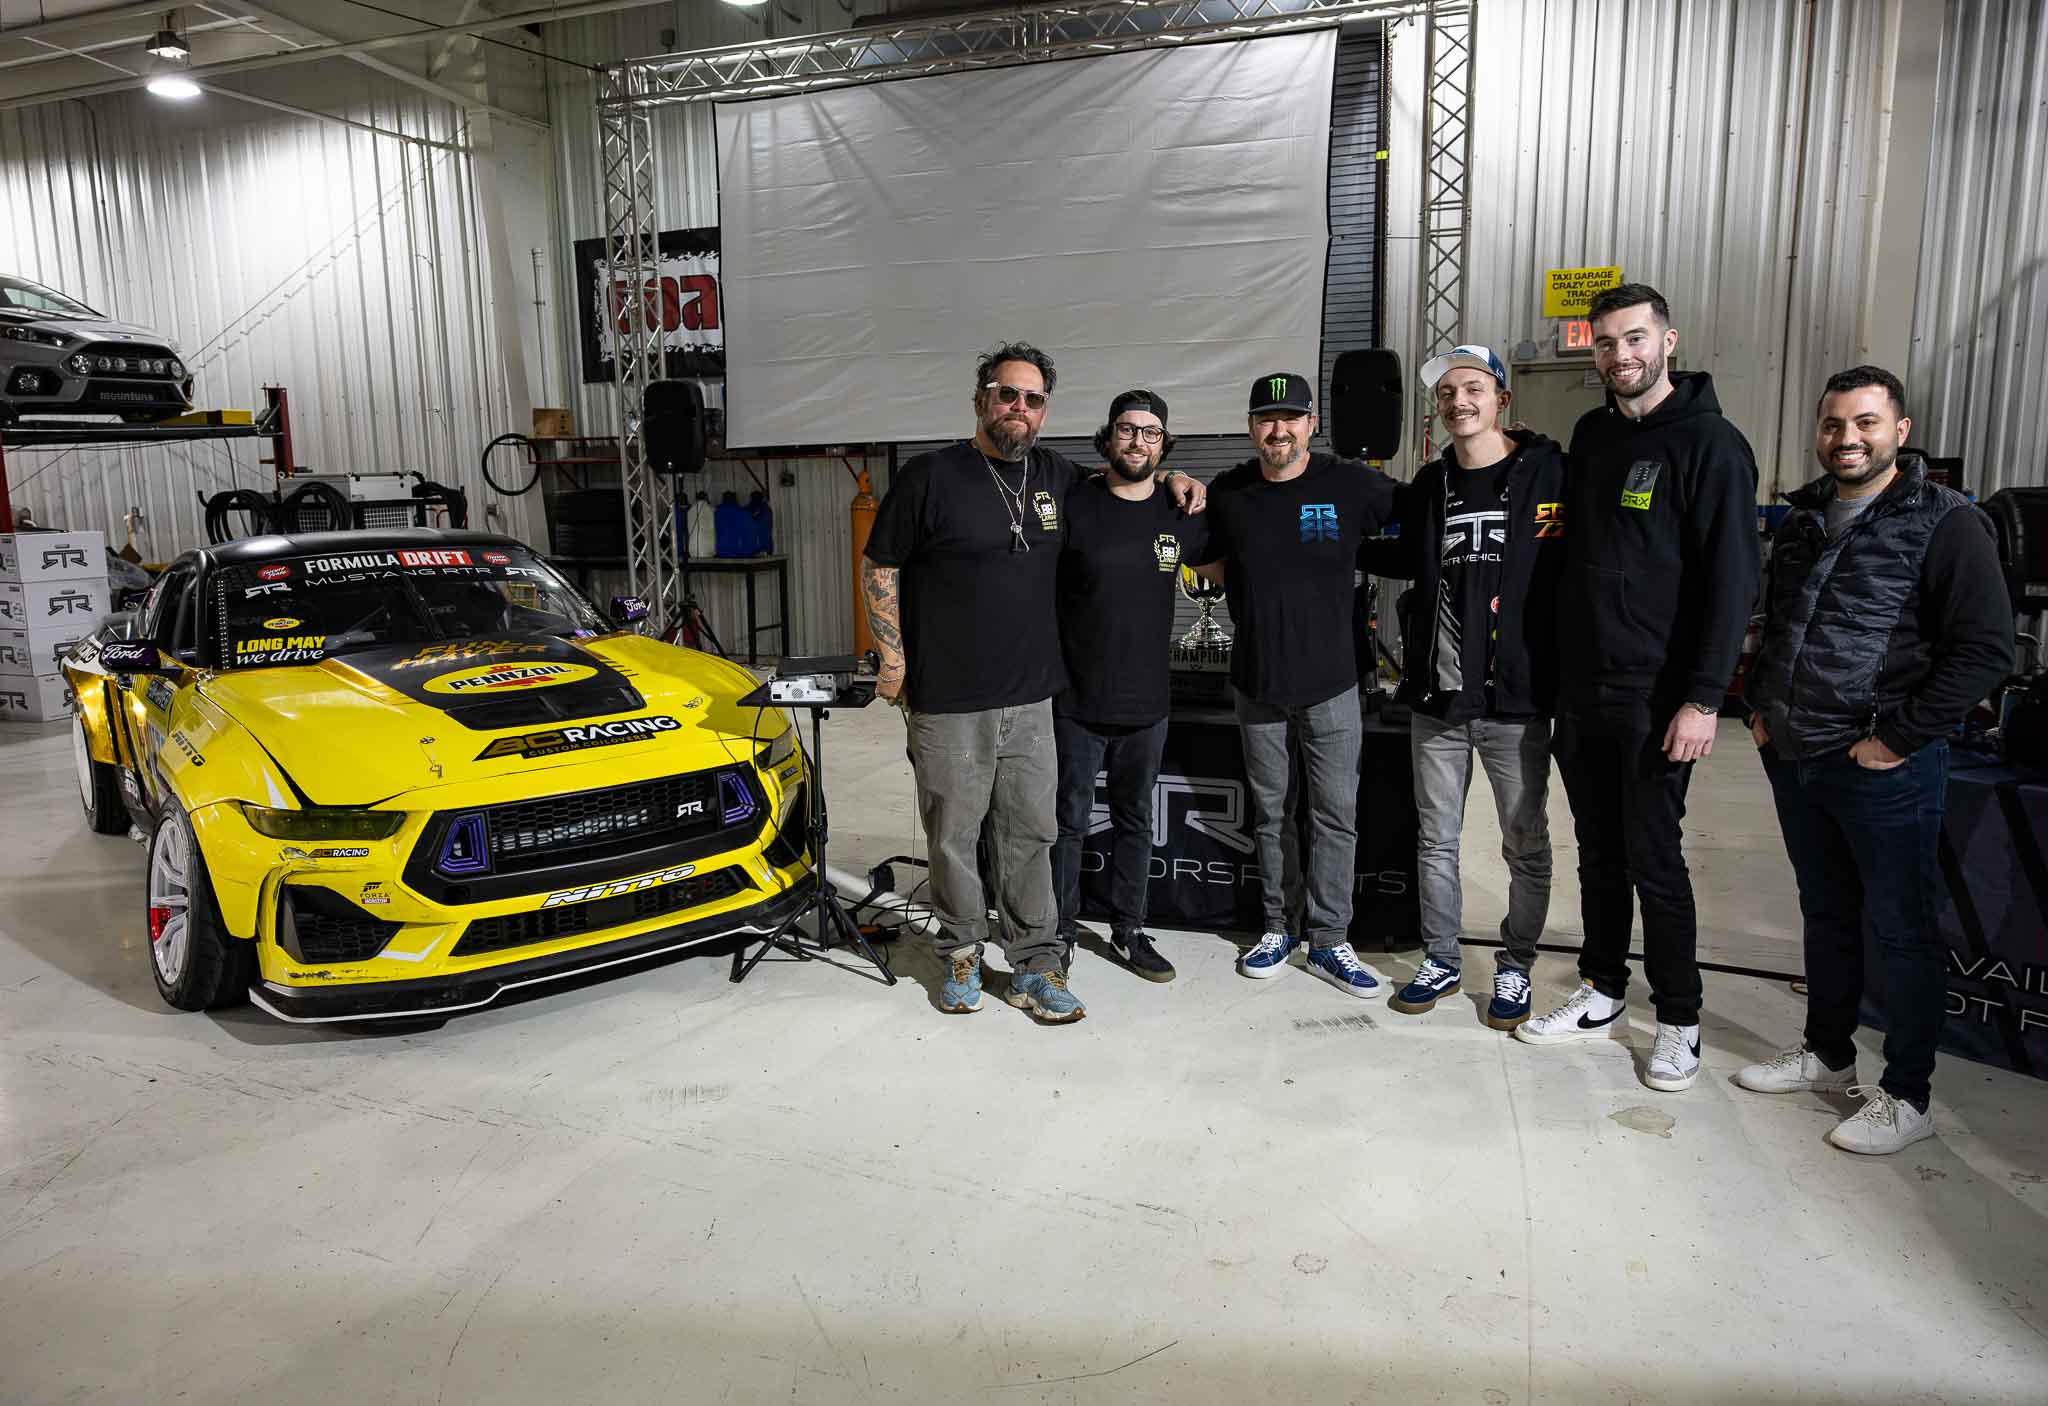 The RTR team takes a group photo in front of the 2023 FD trophies and winning competition car.